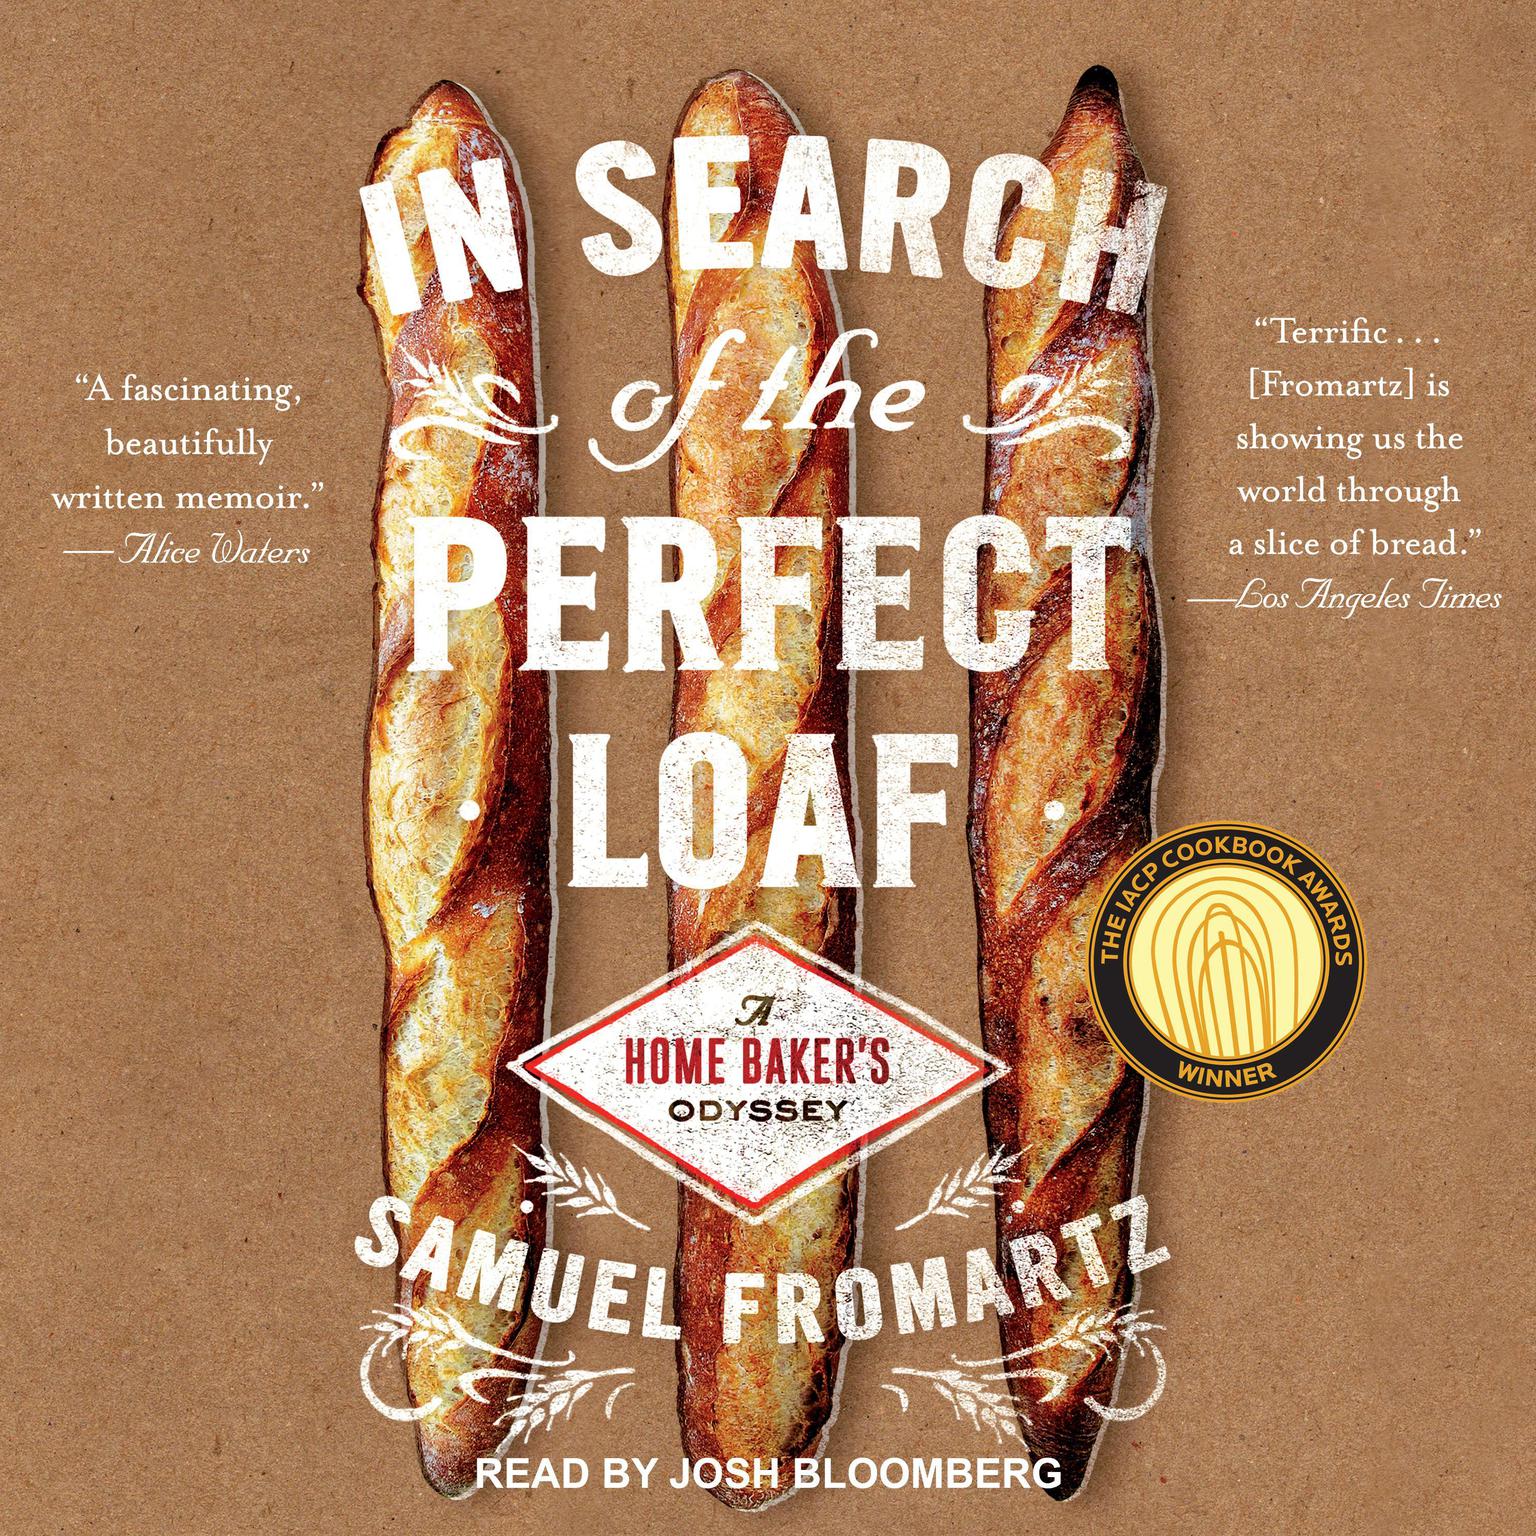 In Search of the Perfect Loaf: A Home Baker’s Odyssey Audiobook, by Samuel Fromartz